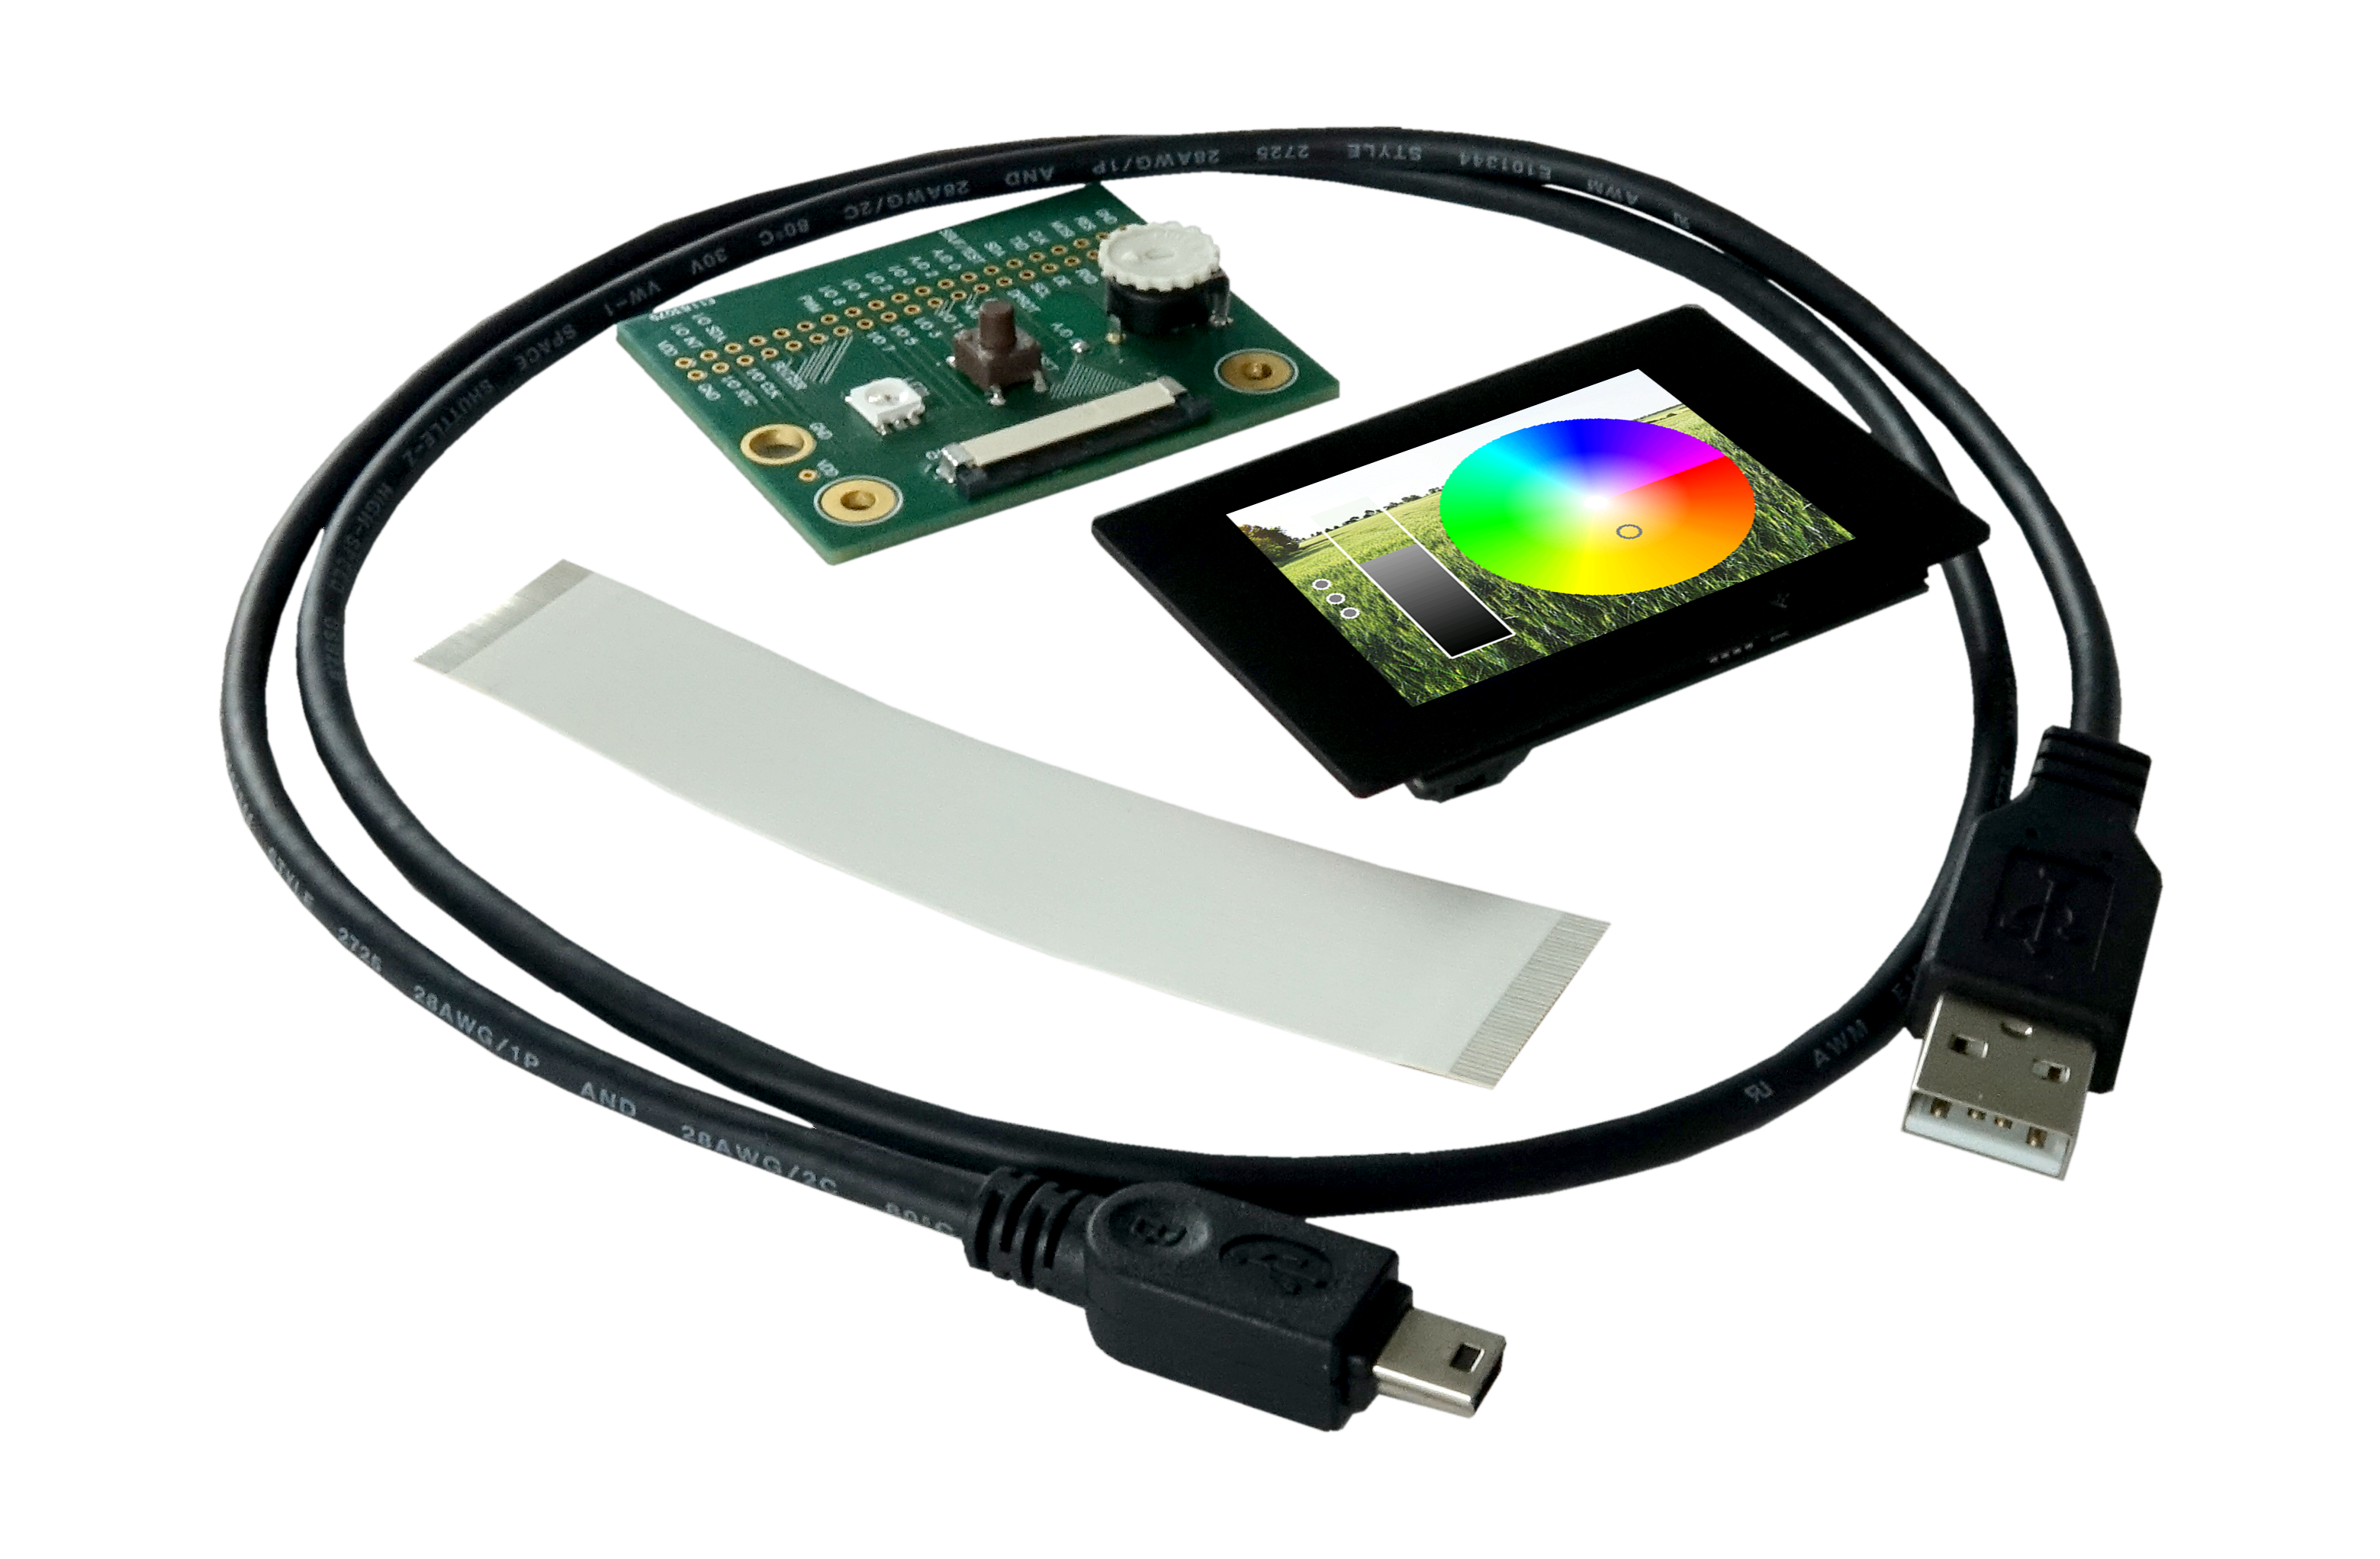 Built-in Industrial displays from ELECTRONIC ASSEMBLY, long availability, also available in small quantities